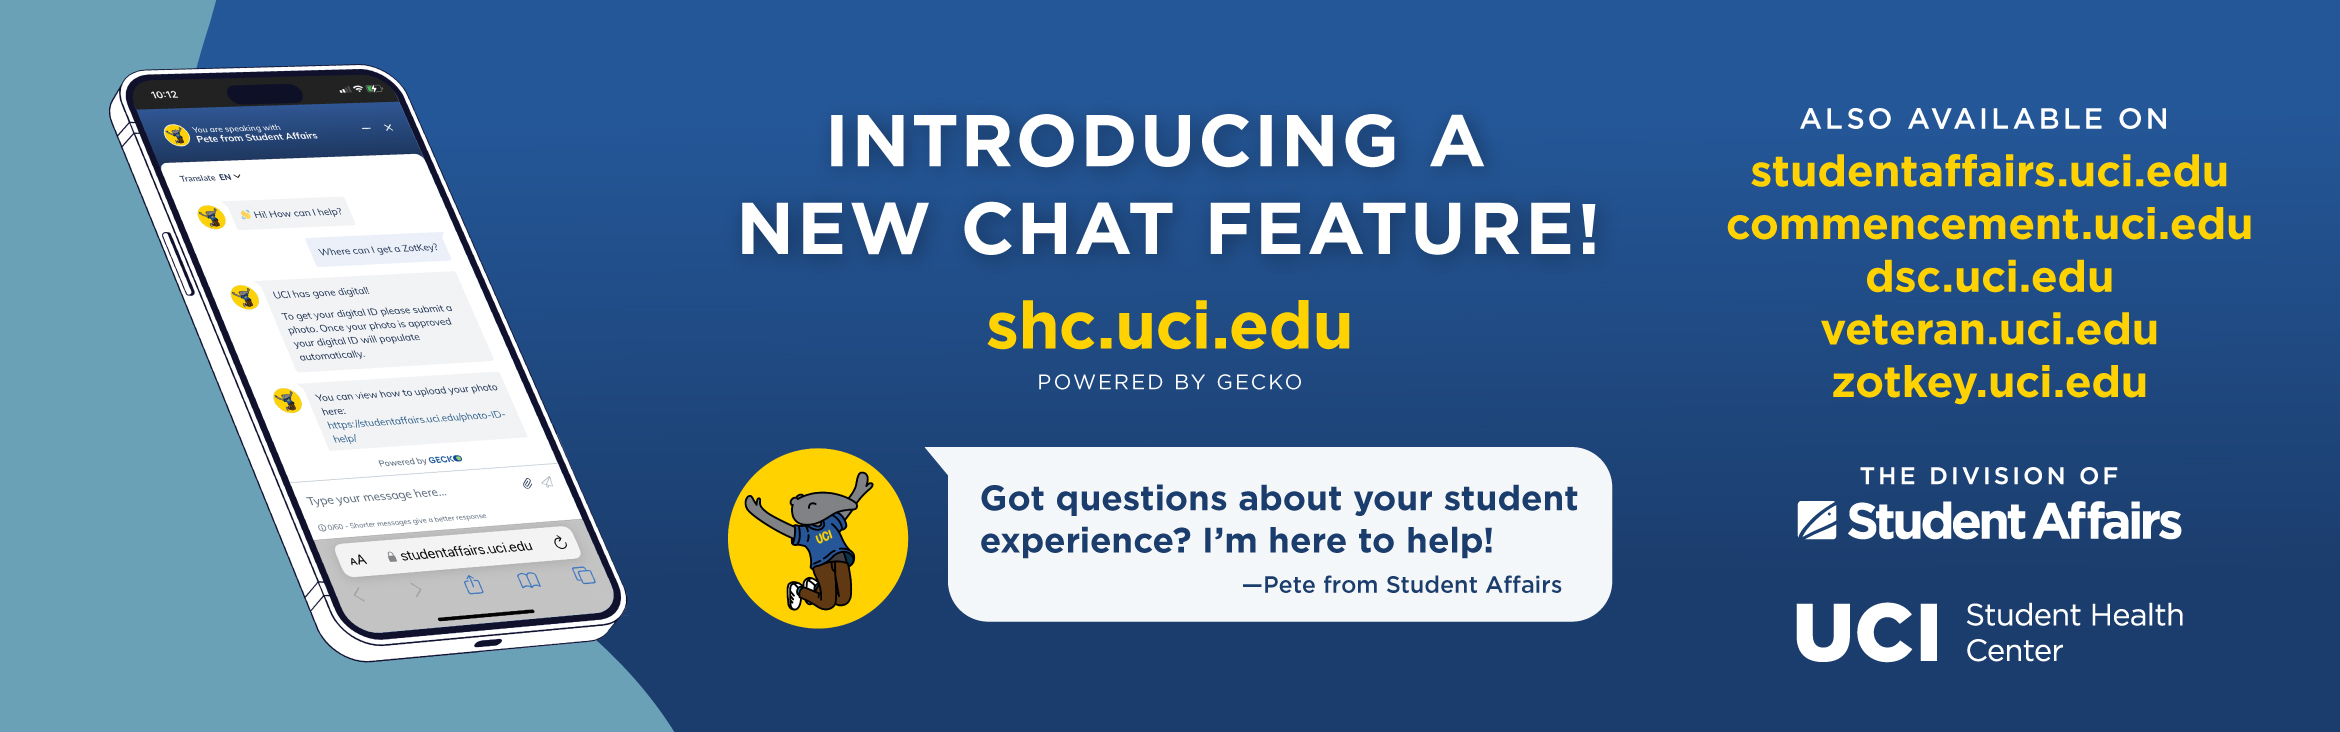 Introducing a New Chat Feature! Got Questions about your student experience? The Chat box is here to help. 